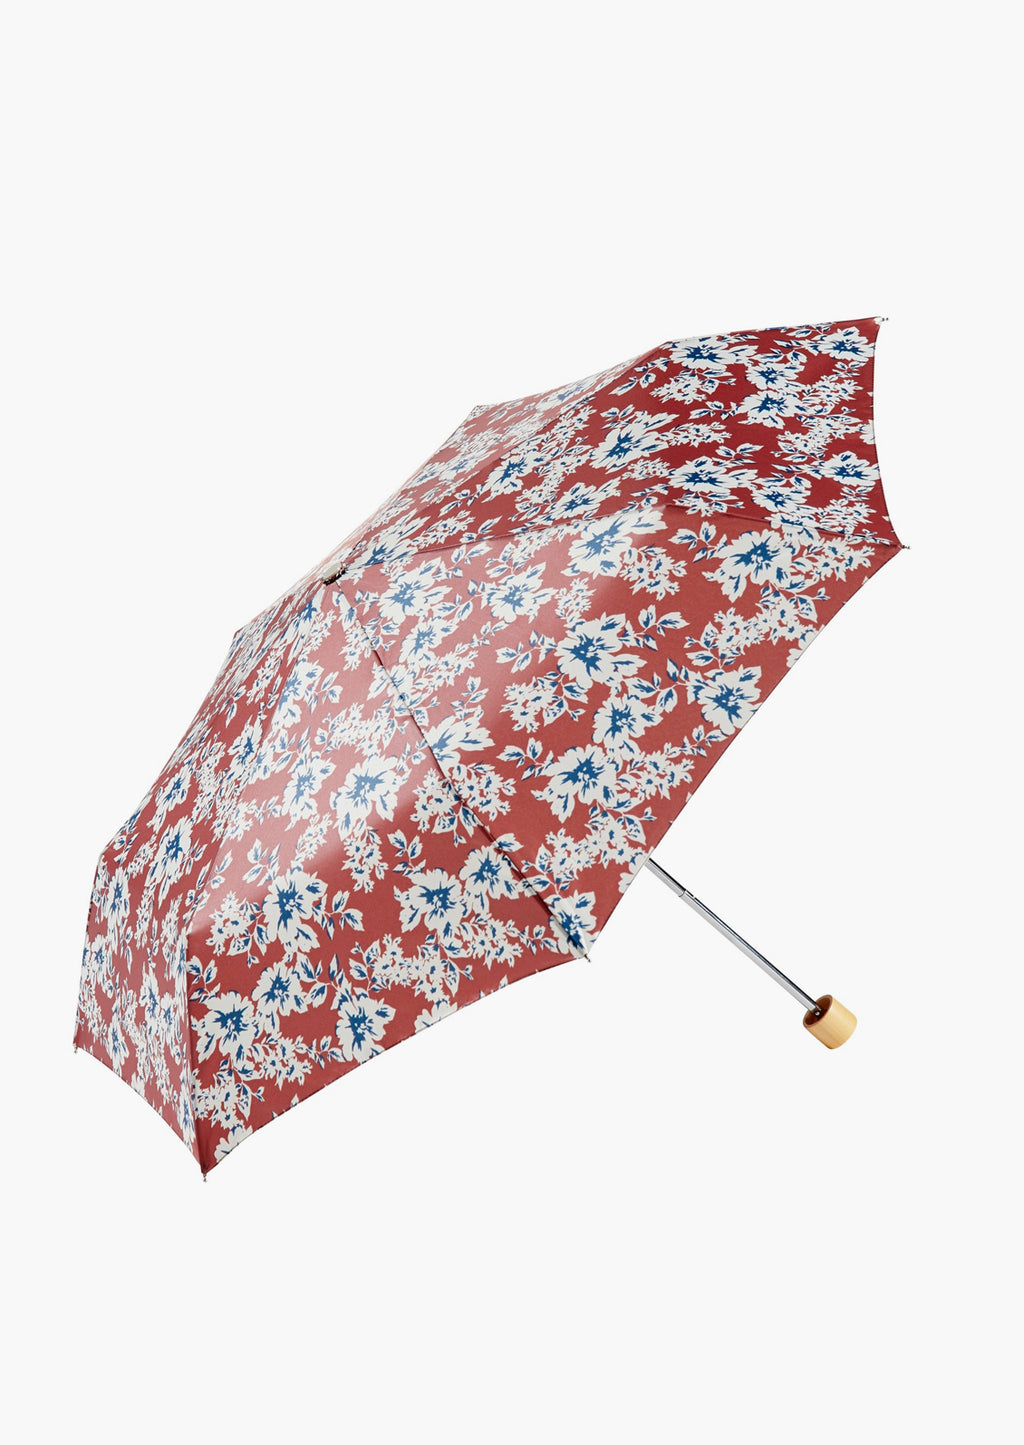 Crimson / Navy Blue: A red and navy floral print umbrella.